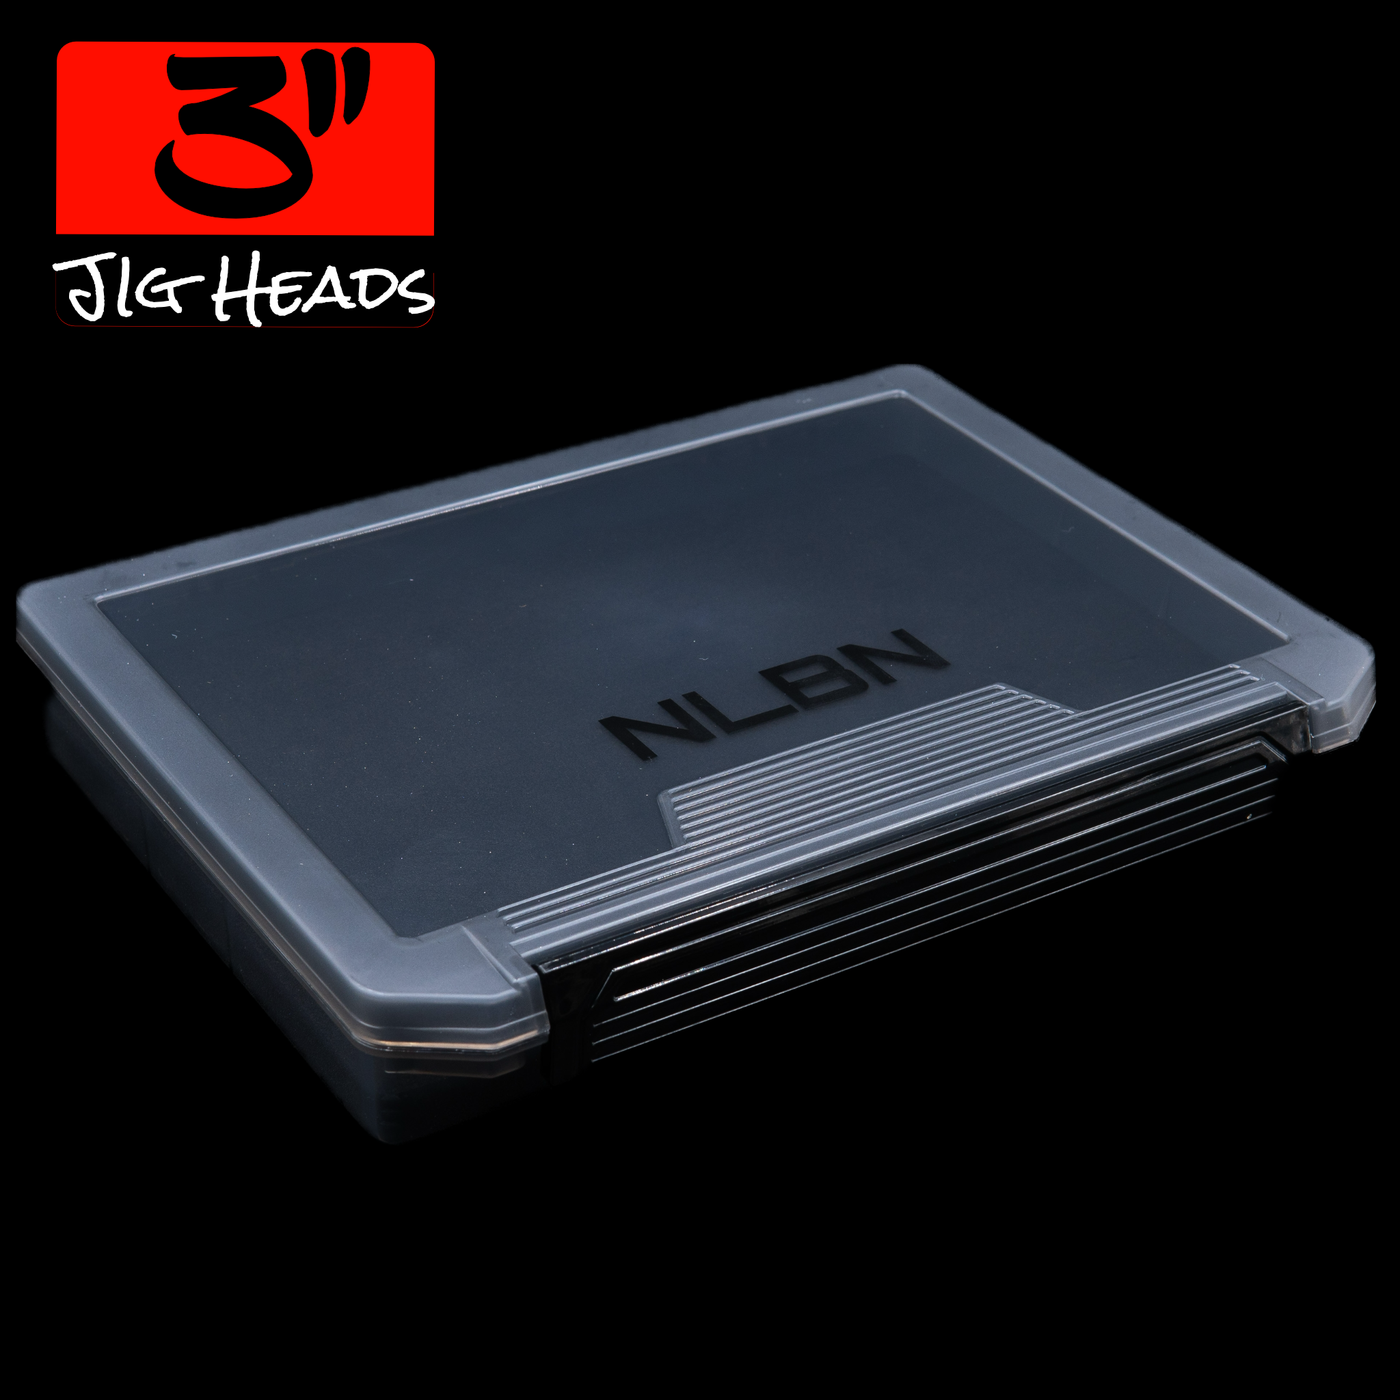 Jig Head Boxes – No Live Bait Needed